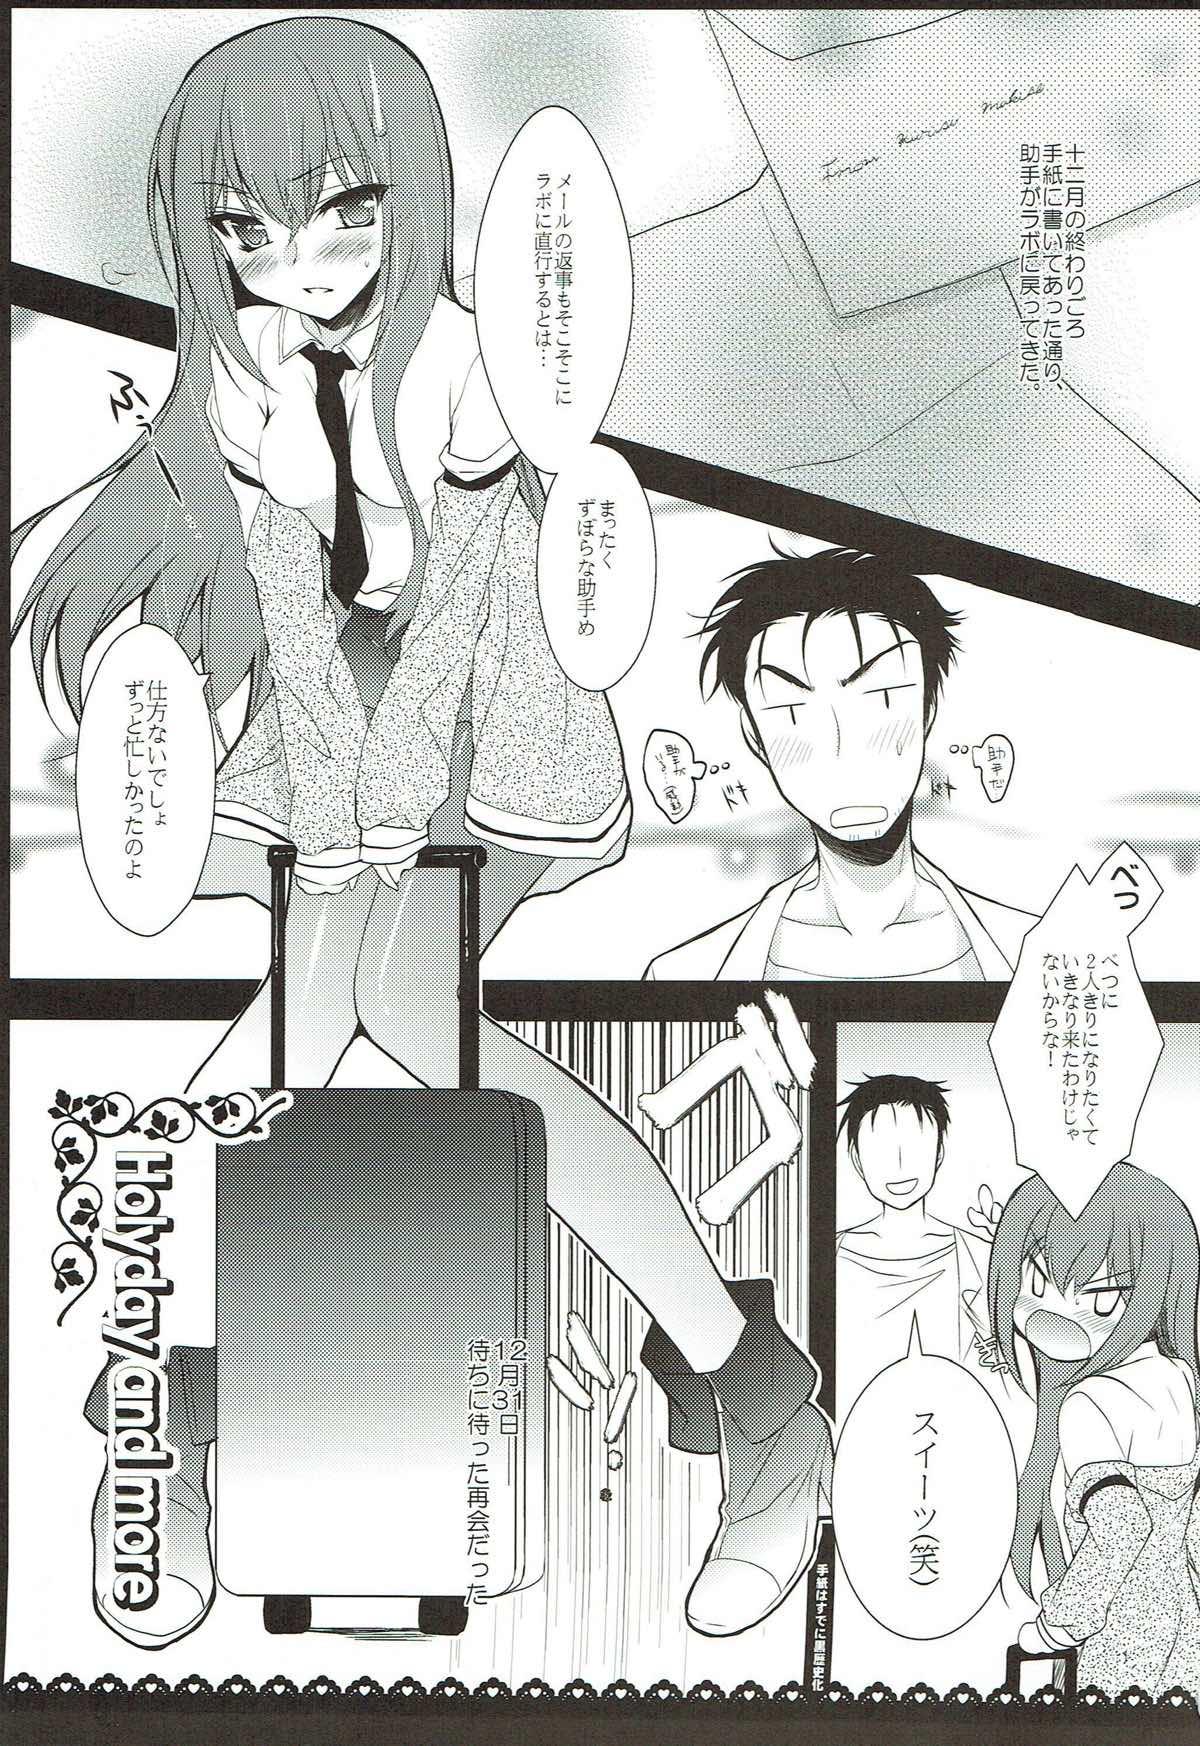 Mum Holyday and more - Steinsgate Massage Sex - Page 2